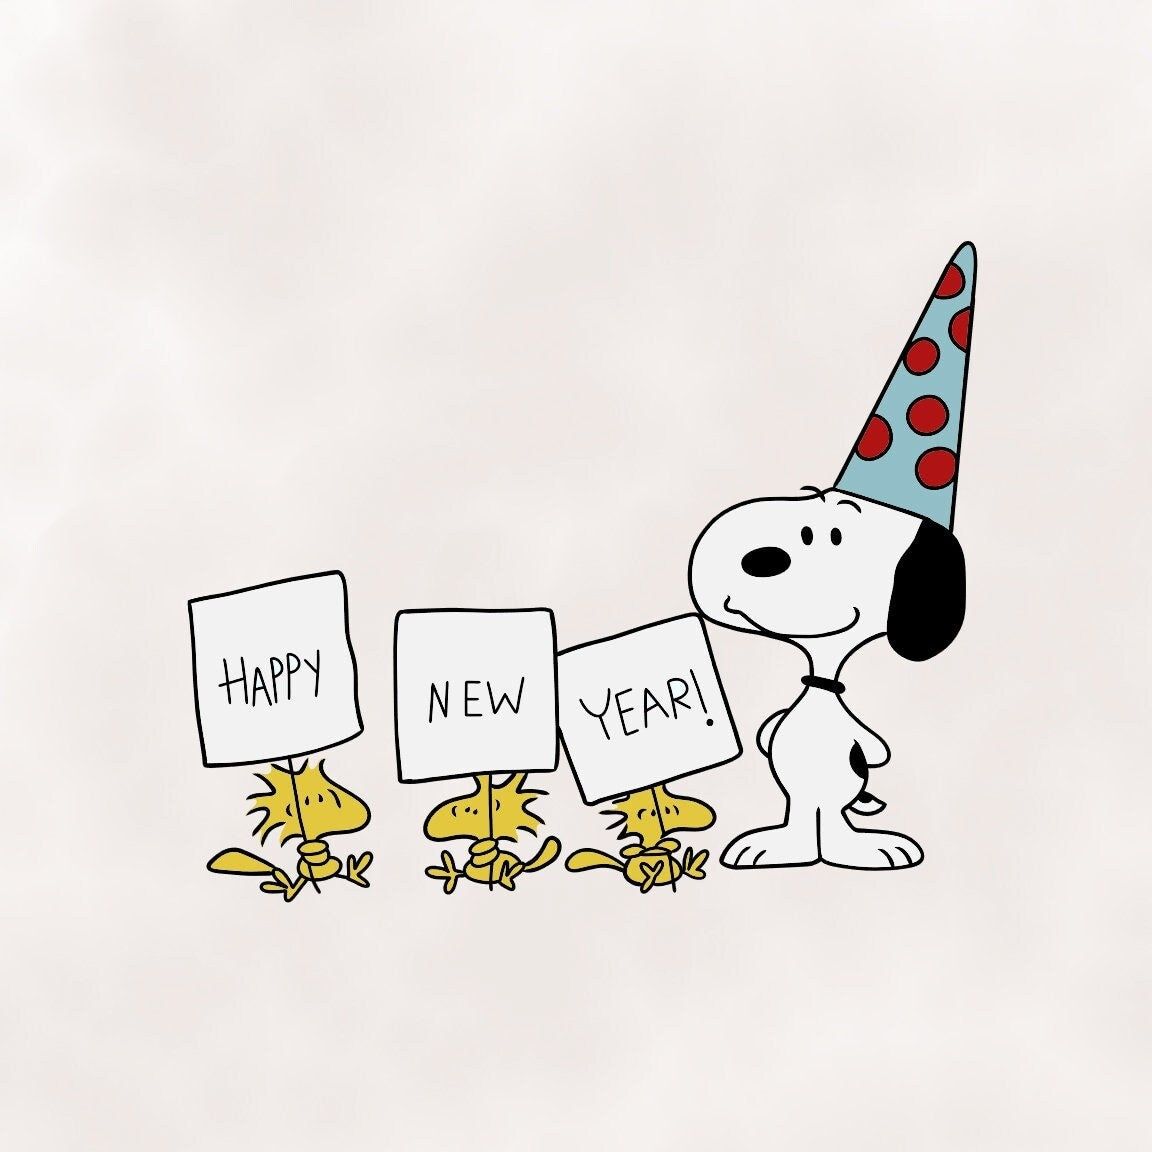 Happy New Year from Snoopy and Woodstock! - New Year, Charlie Brown